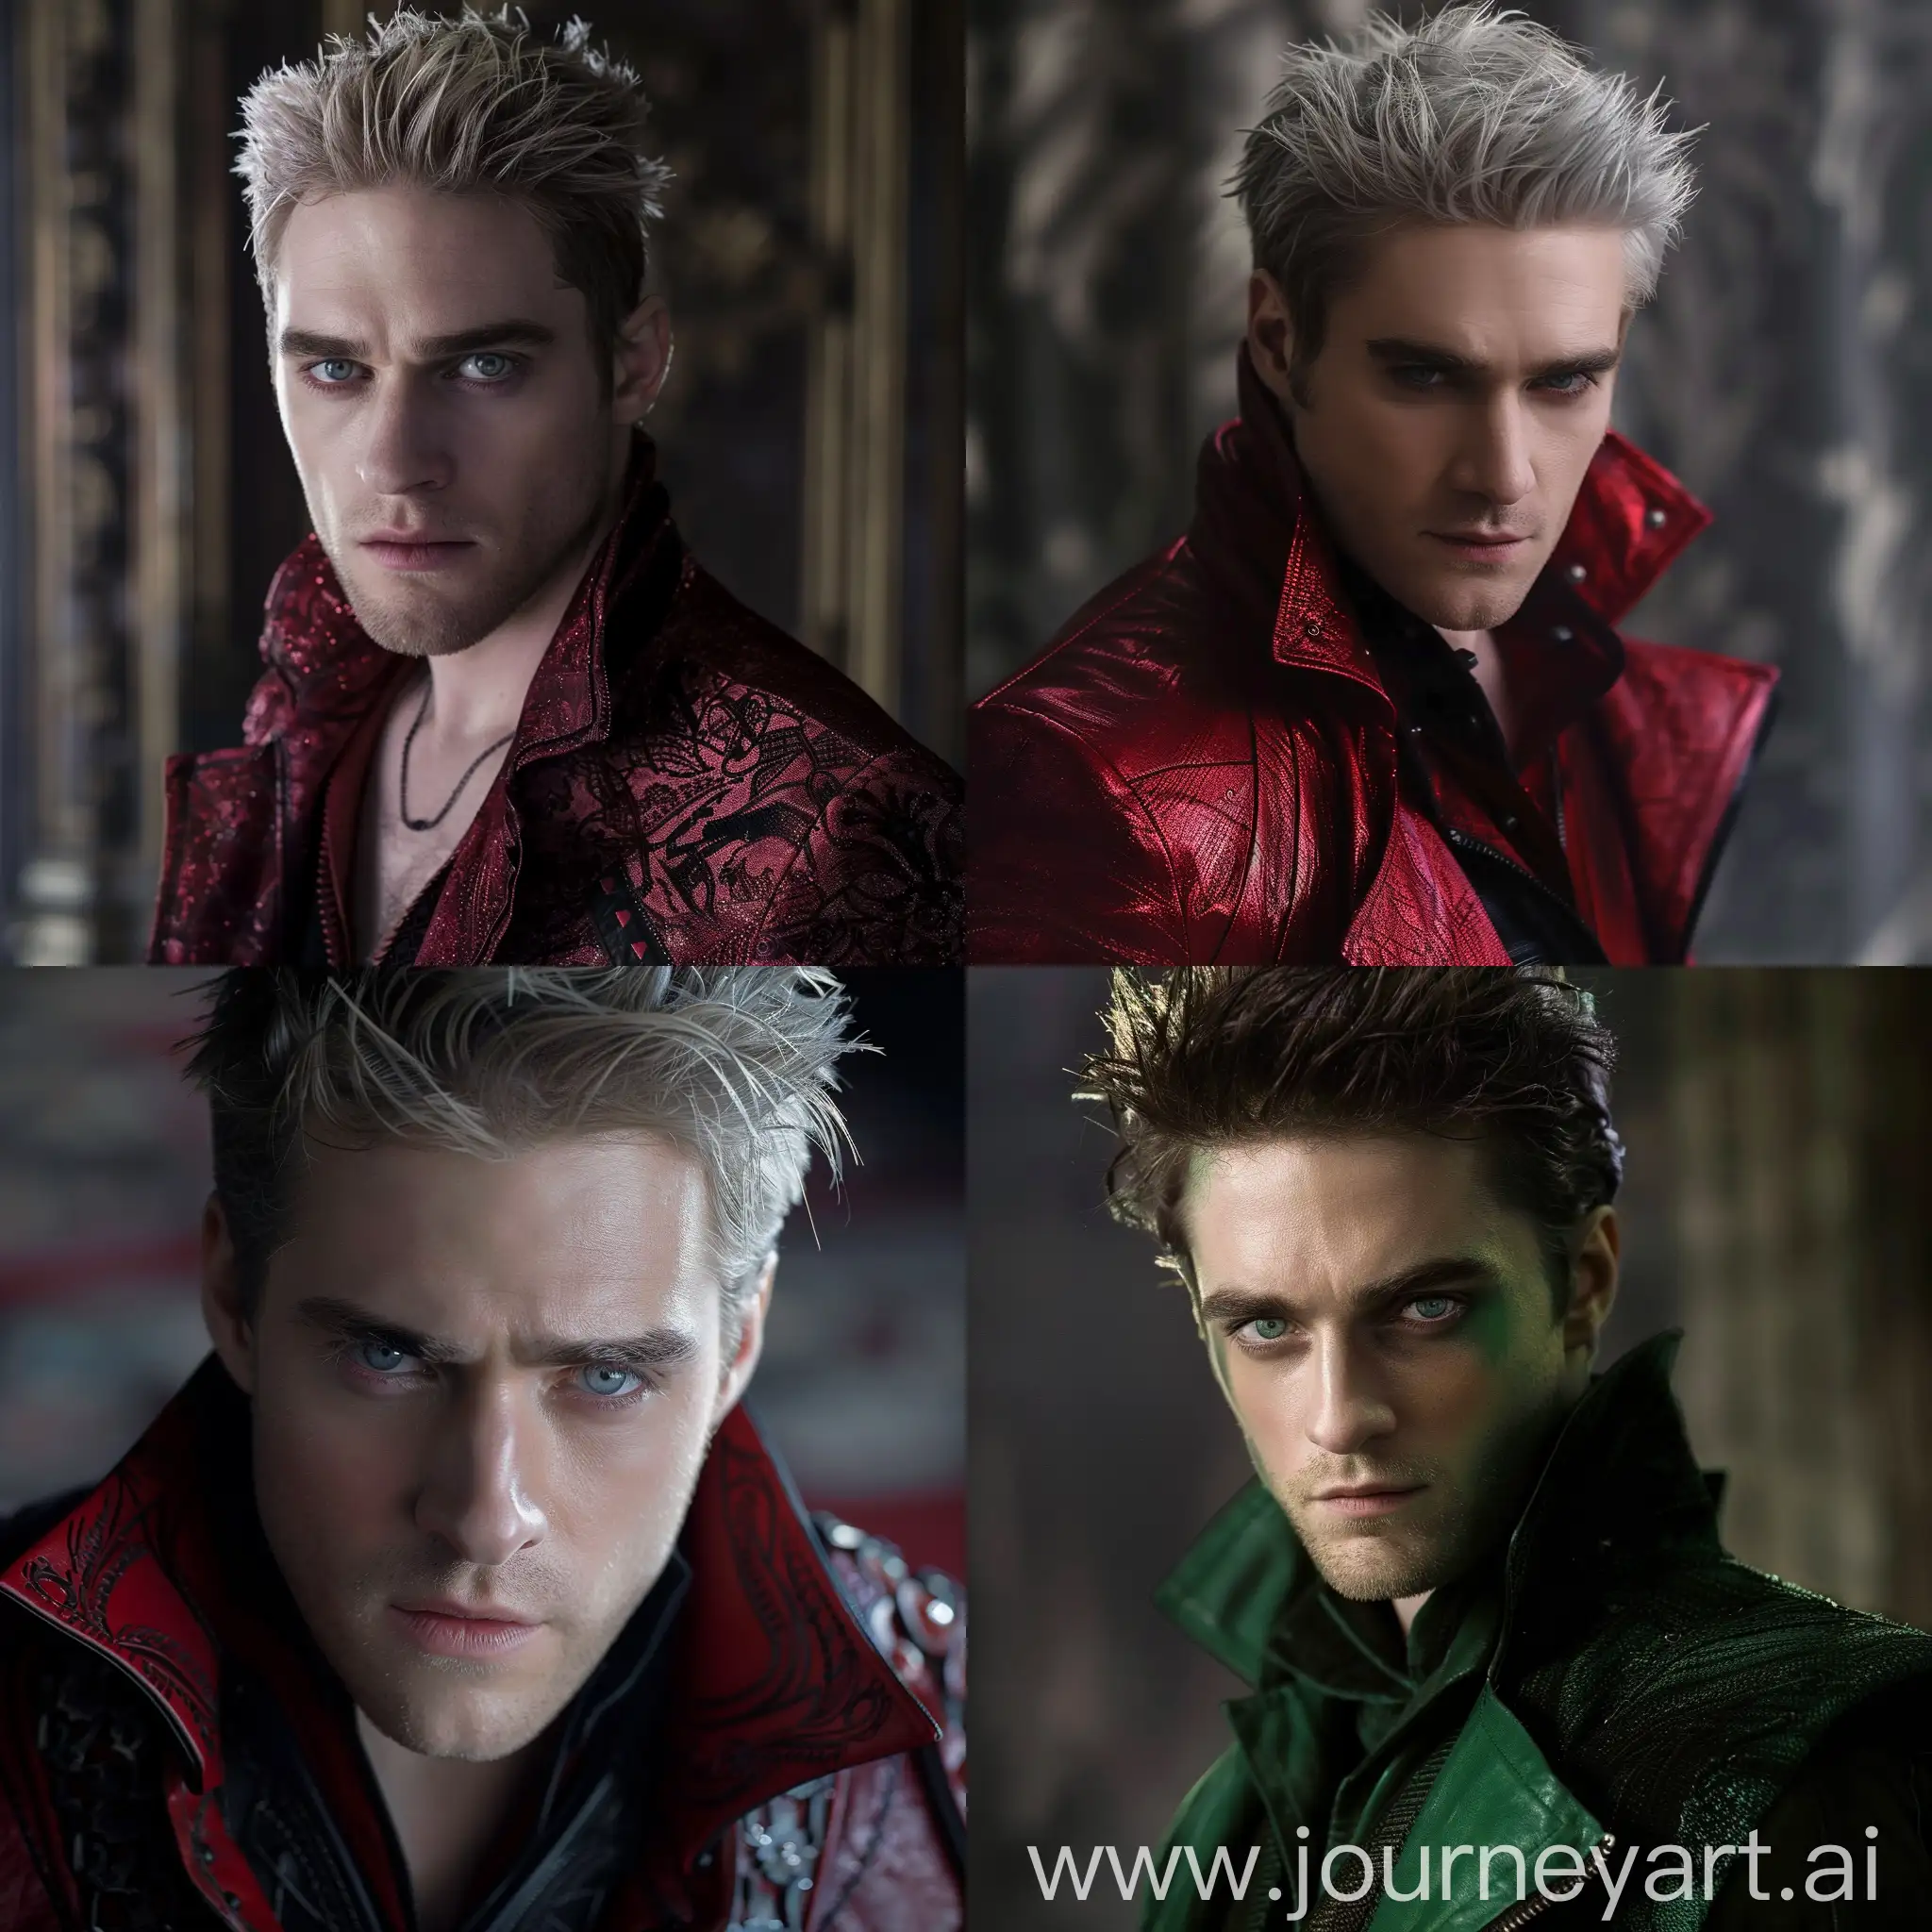 Robert-Pattinson-as-Vergil-from-Devil-May-Cry-Intense-Action-Portrayal